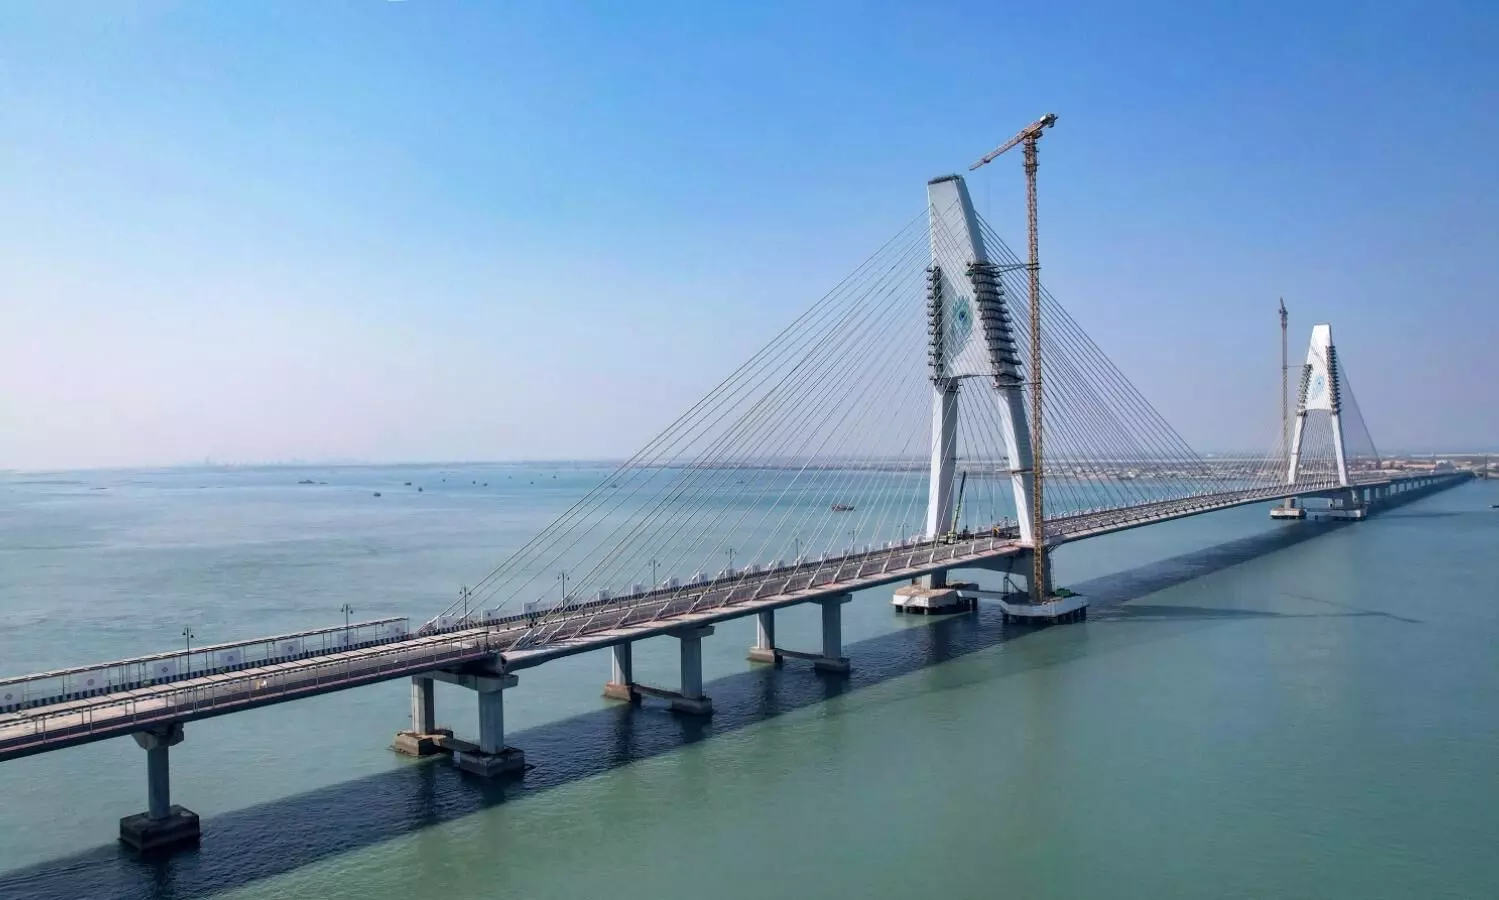 PM Modi will open India’s longest cable-stayed bridge in Gujarat today